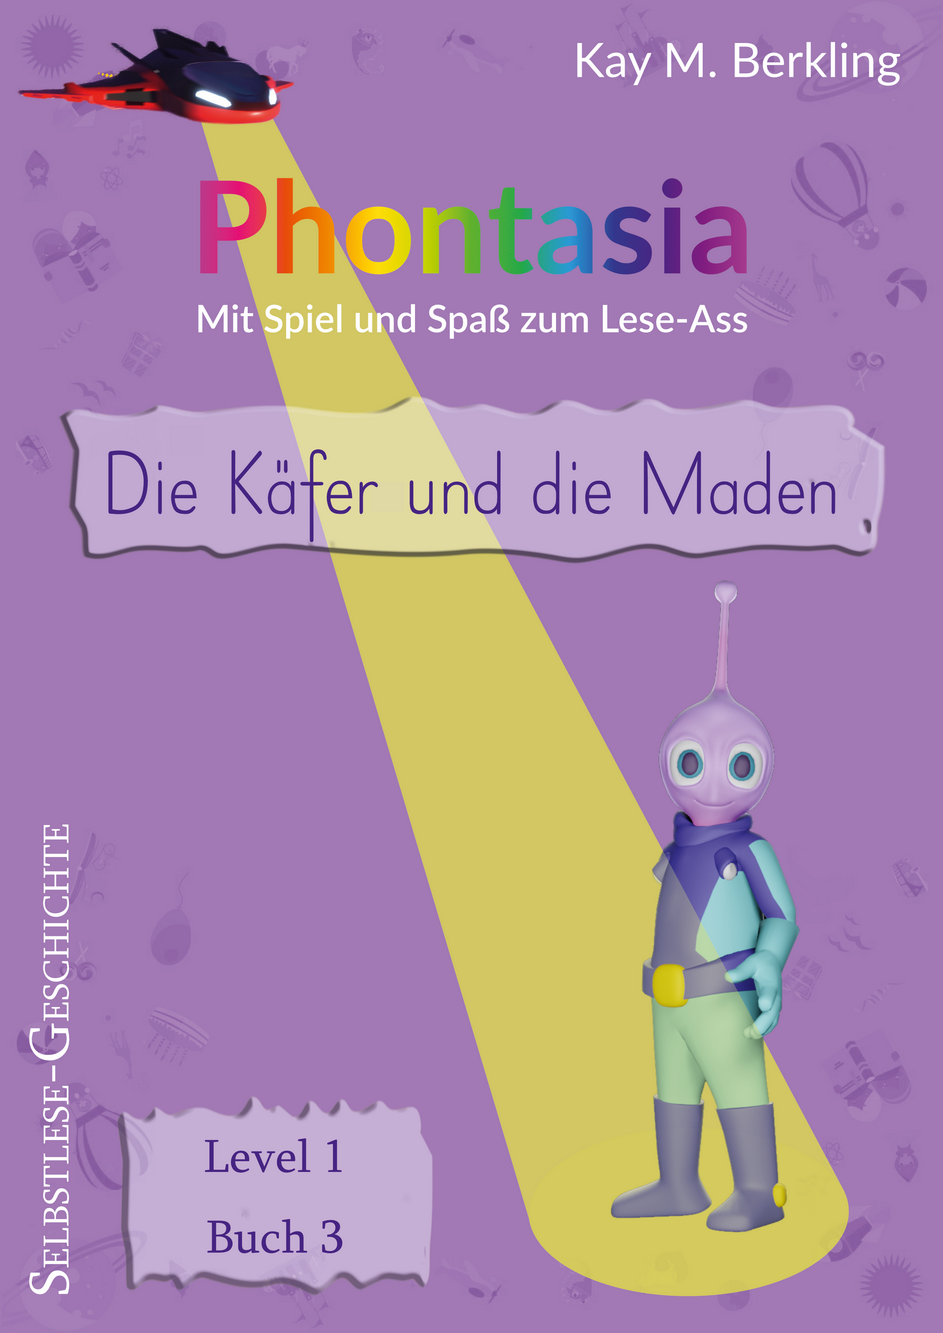 Phontasia: Cover Selbstlese-Geschichte Level 1.3